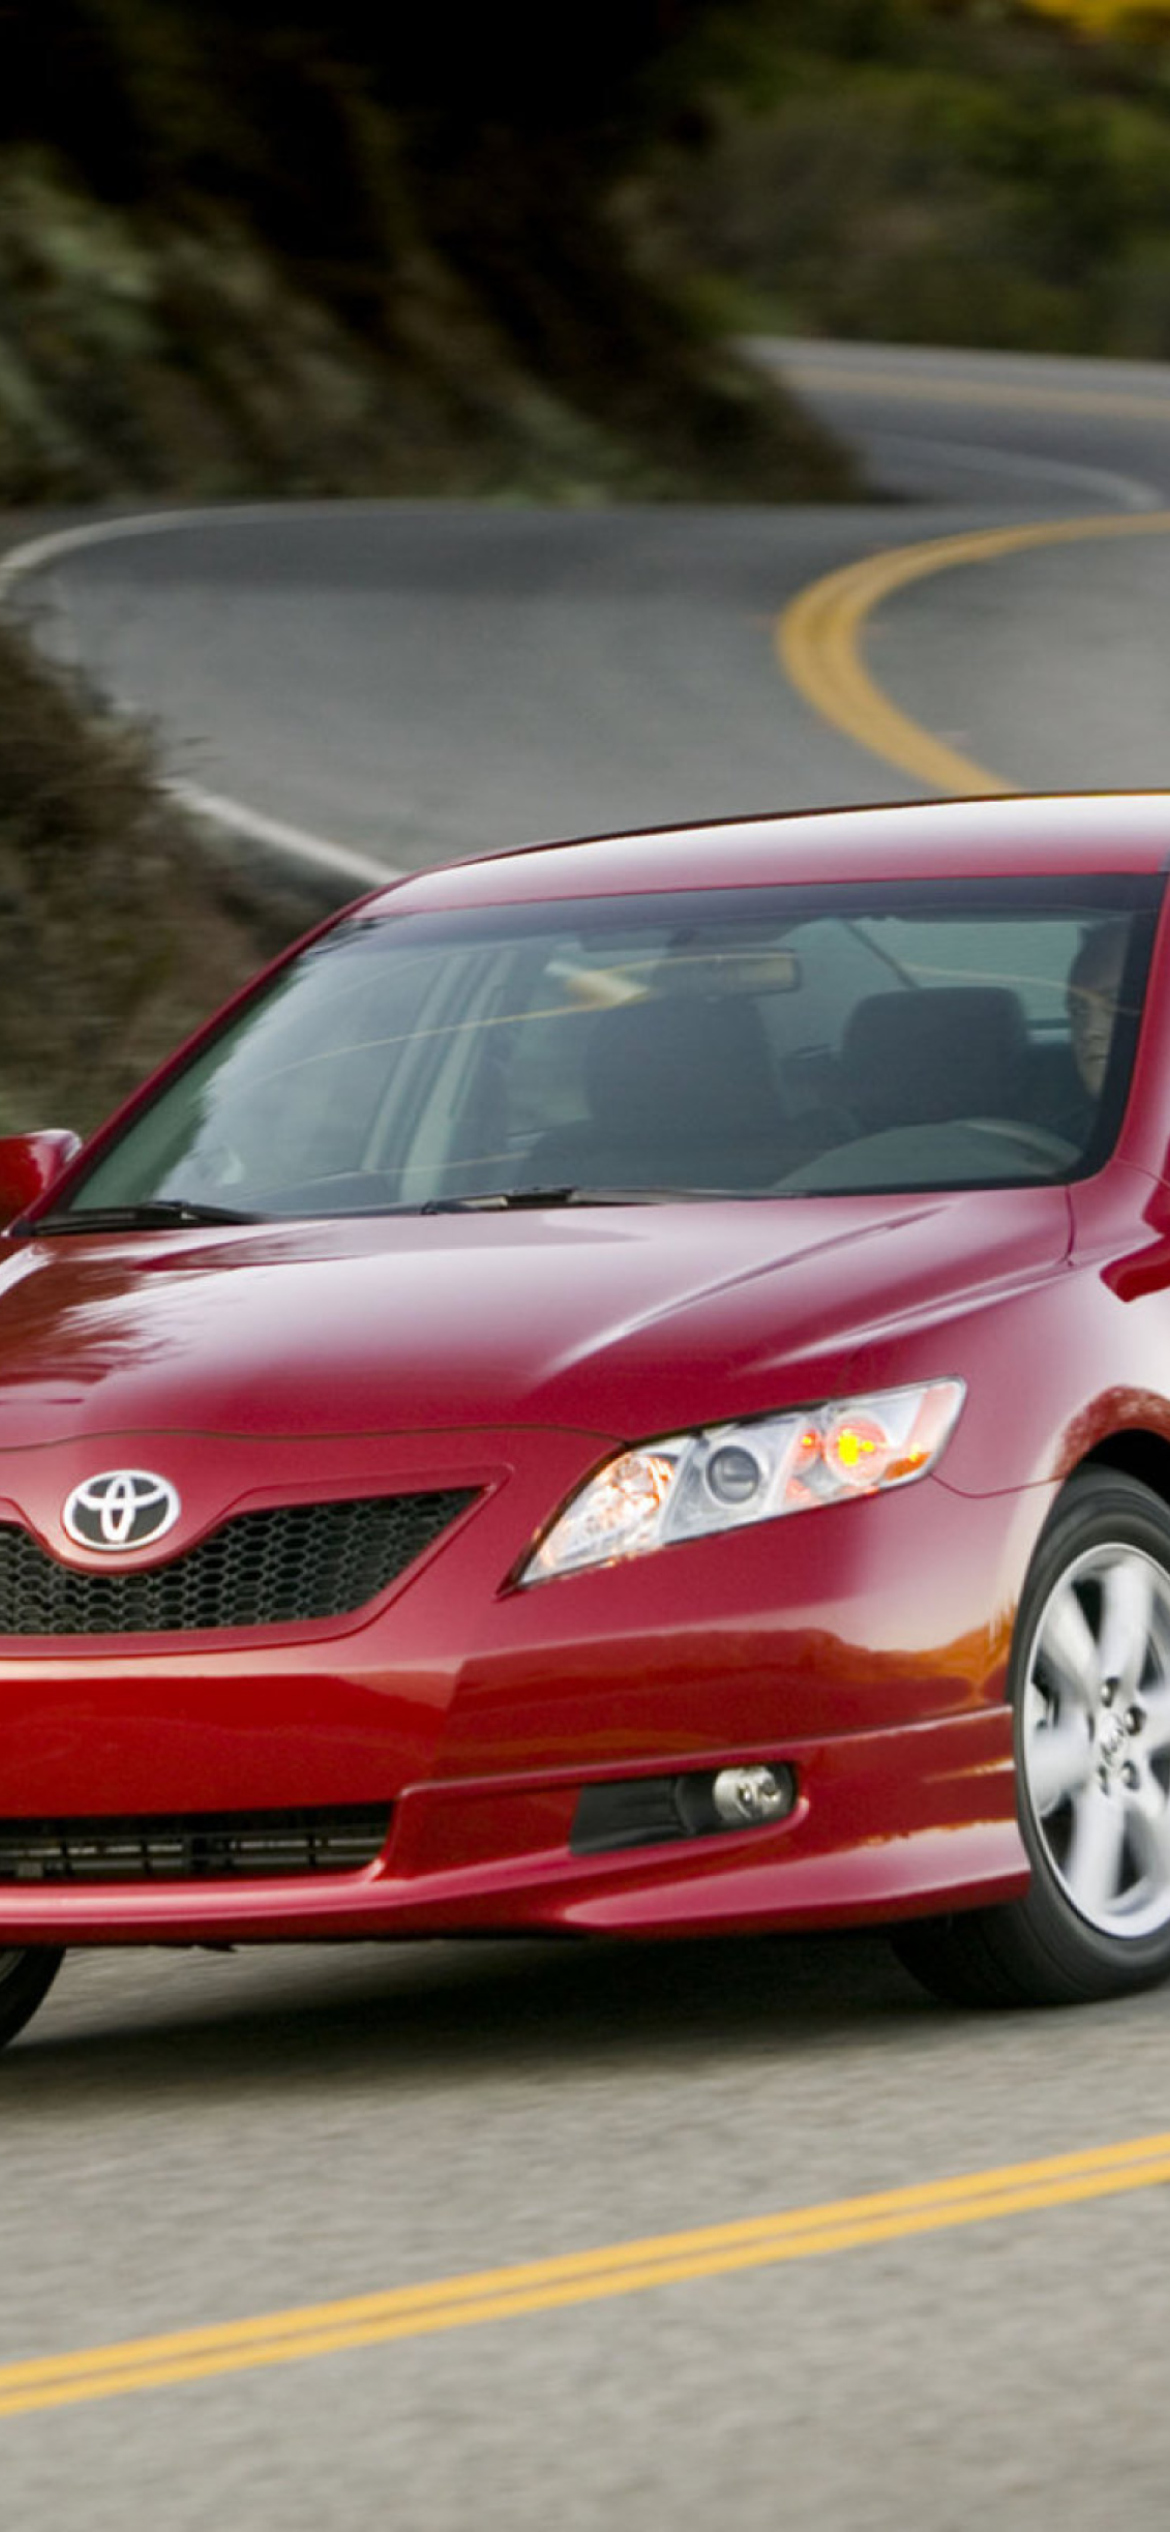 Red Toyota Camry wallpaper 1170x2532